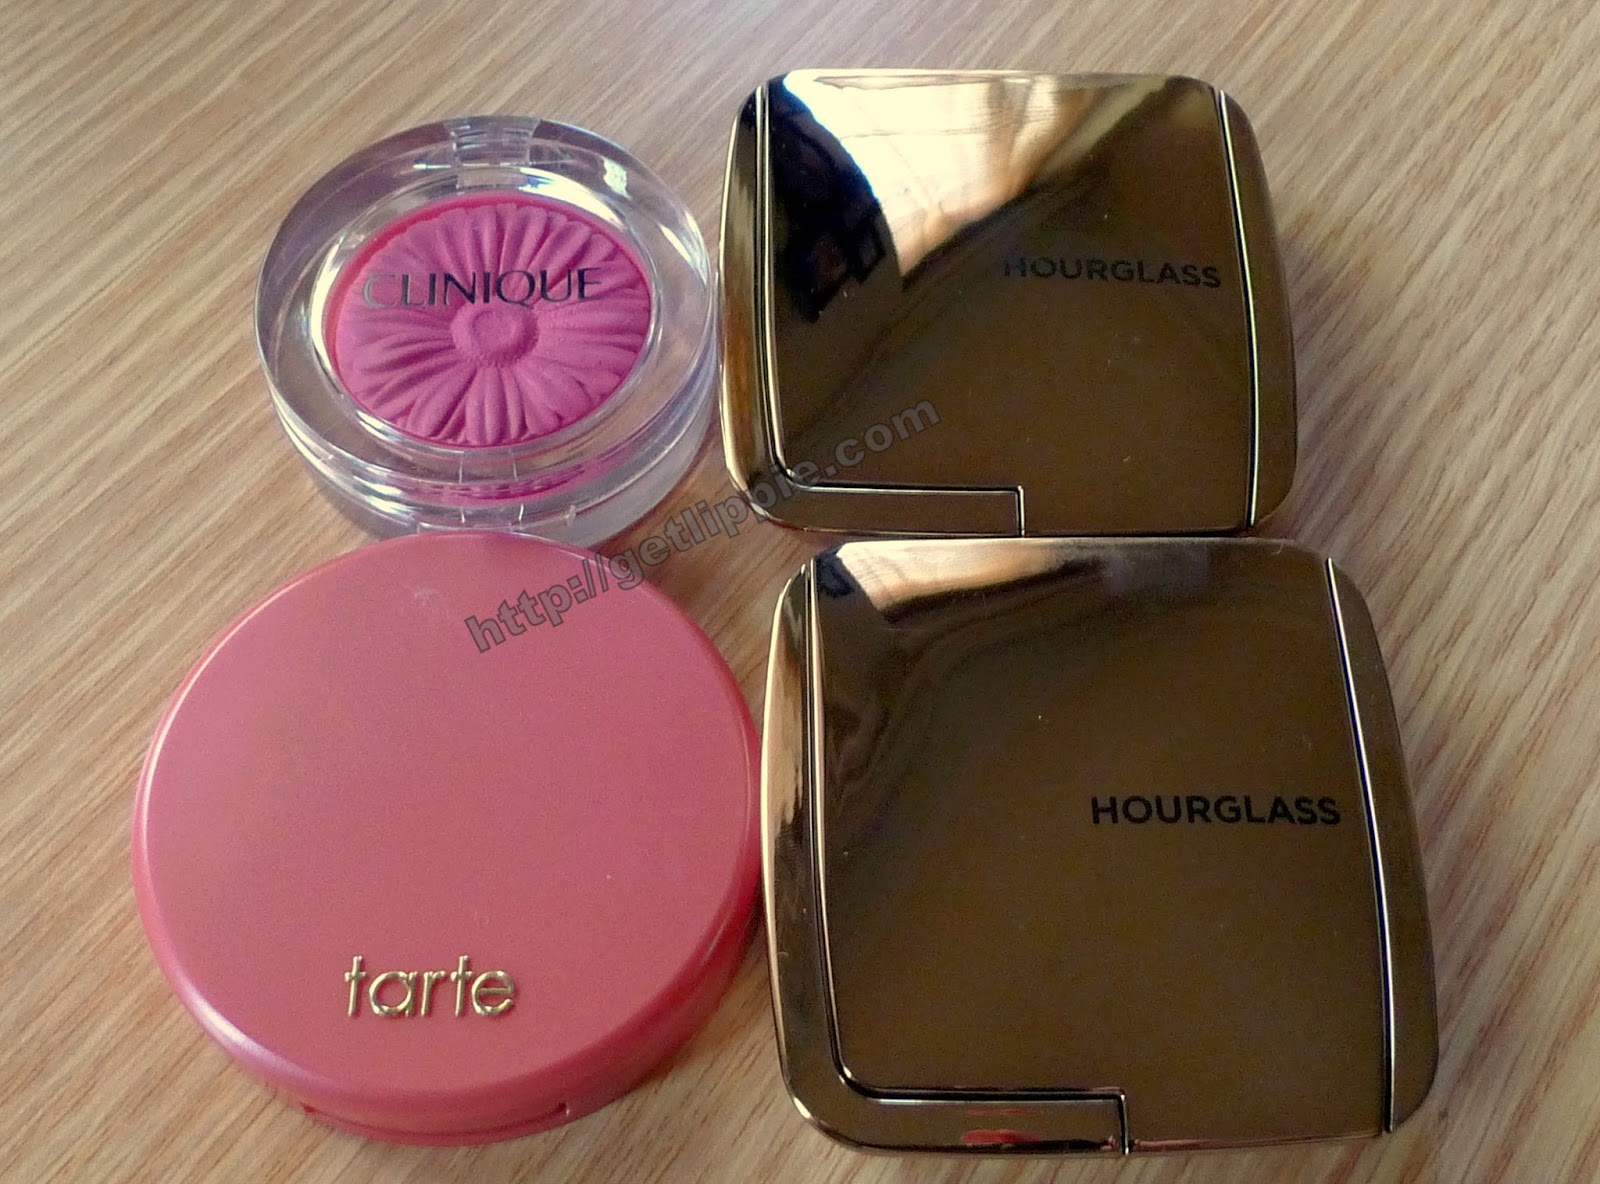 Spring Blushers with Clinique, Hourglass and Tarte